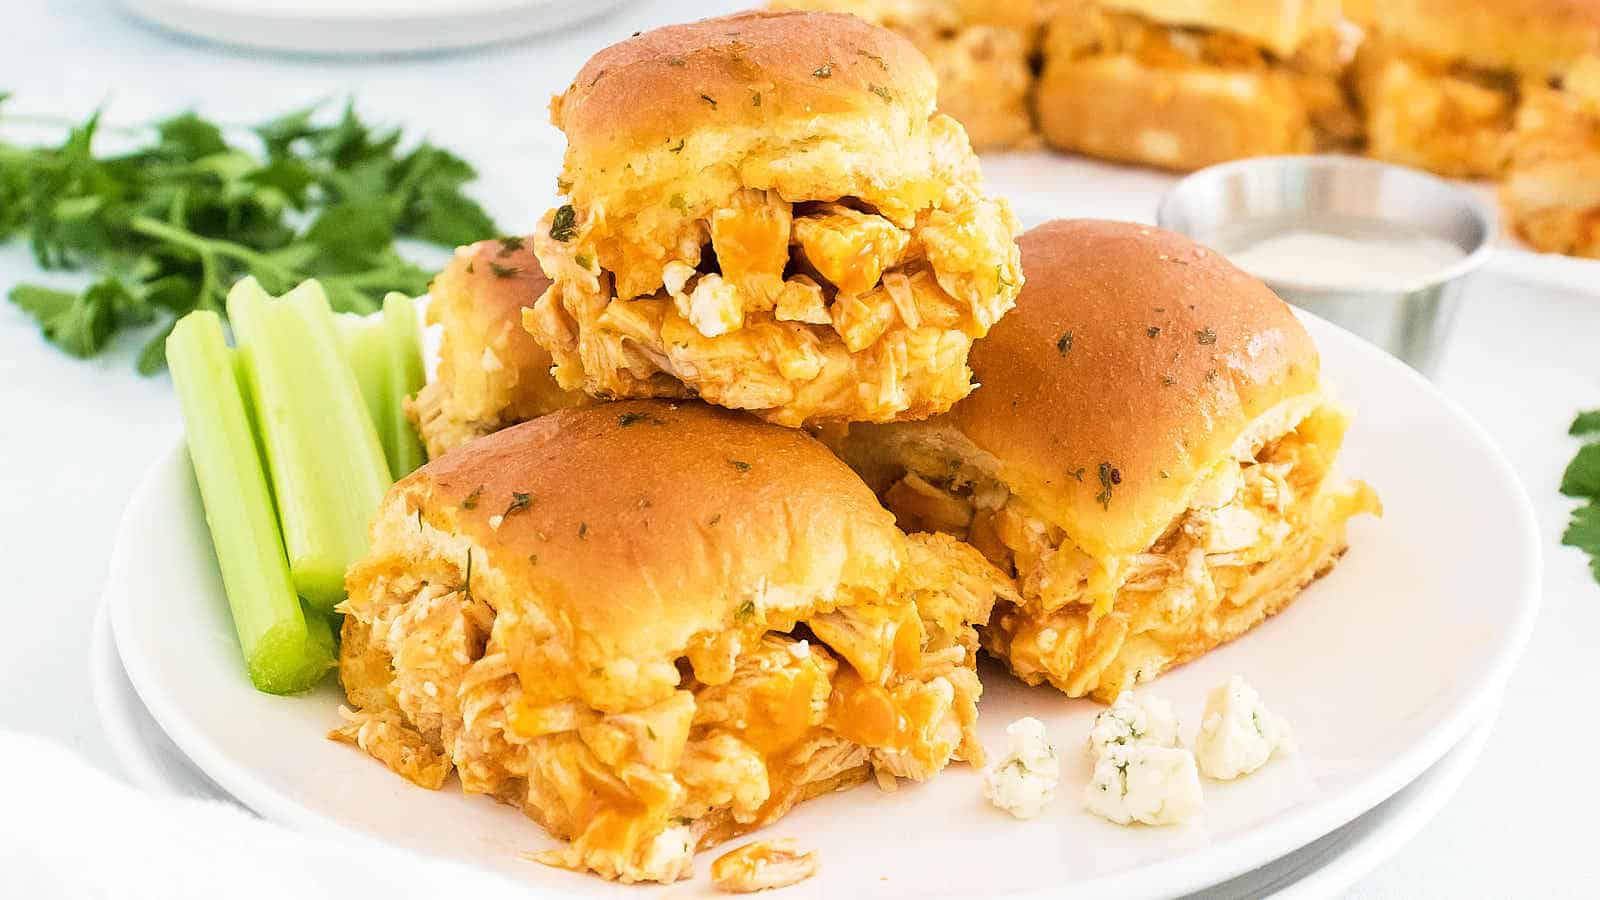 Buffalo Chicken Sliders recipe by Cheerful Cook.